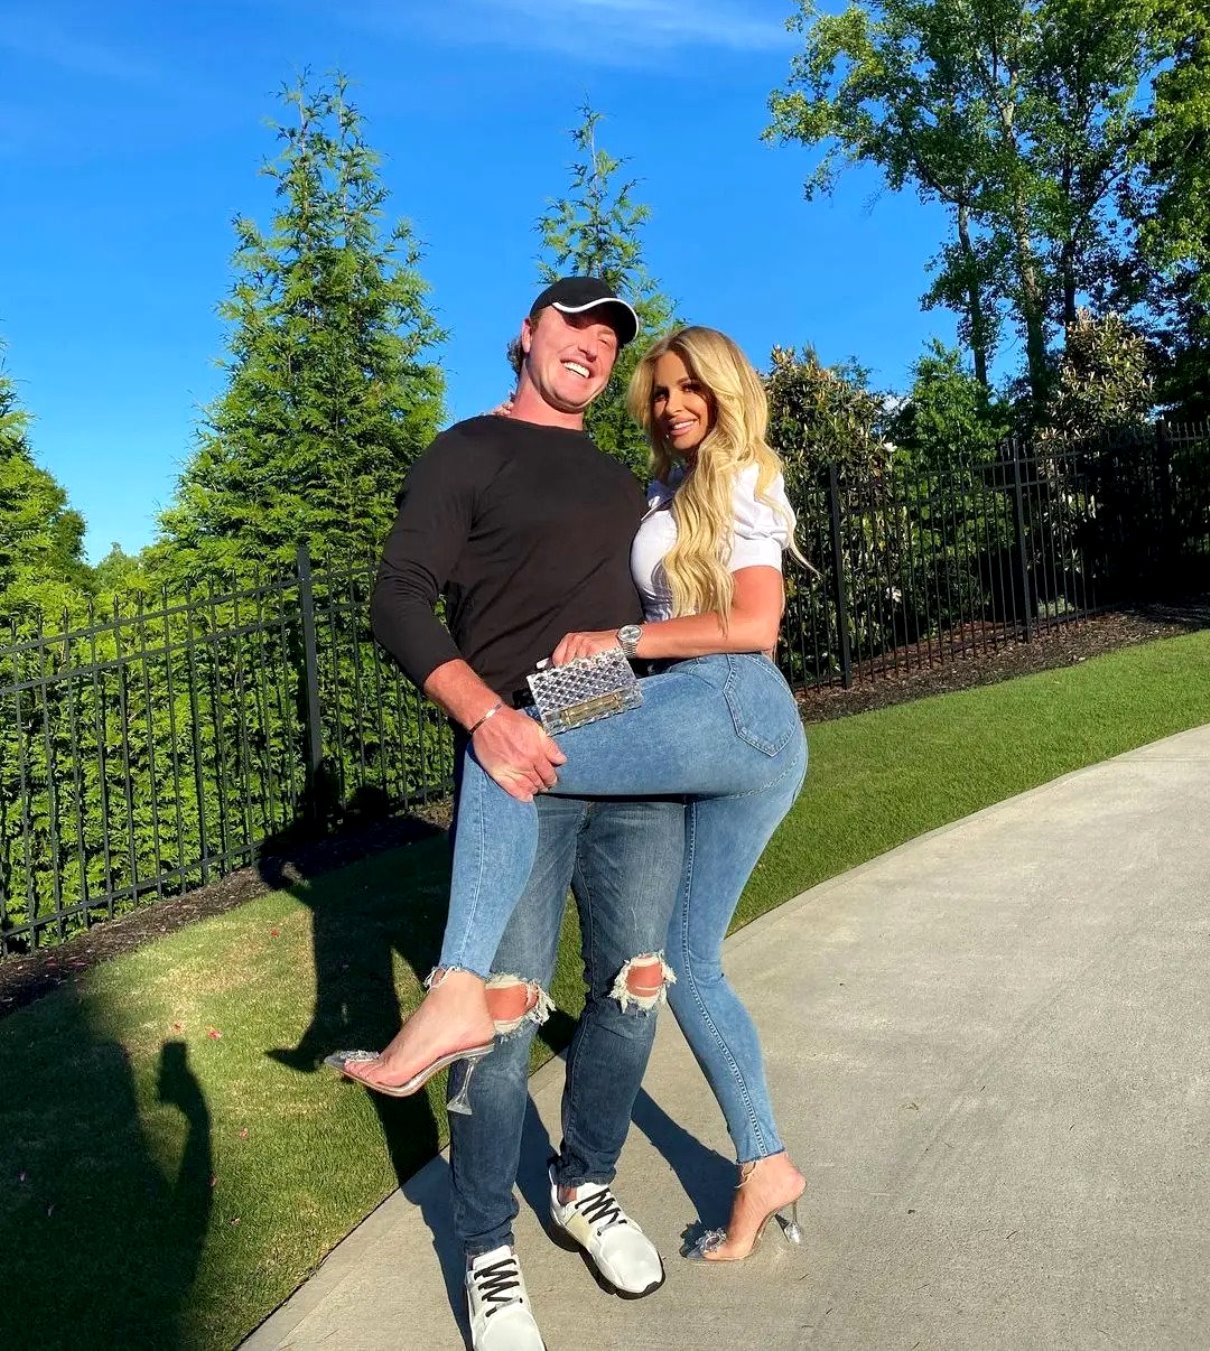 Kim Zolciak Asks Judge to Dismiss Divorce Filing Due to Lots of Sex With Kroy Biermann Weeks After He Revealed Finances Were Dire